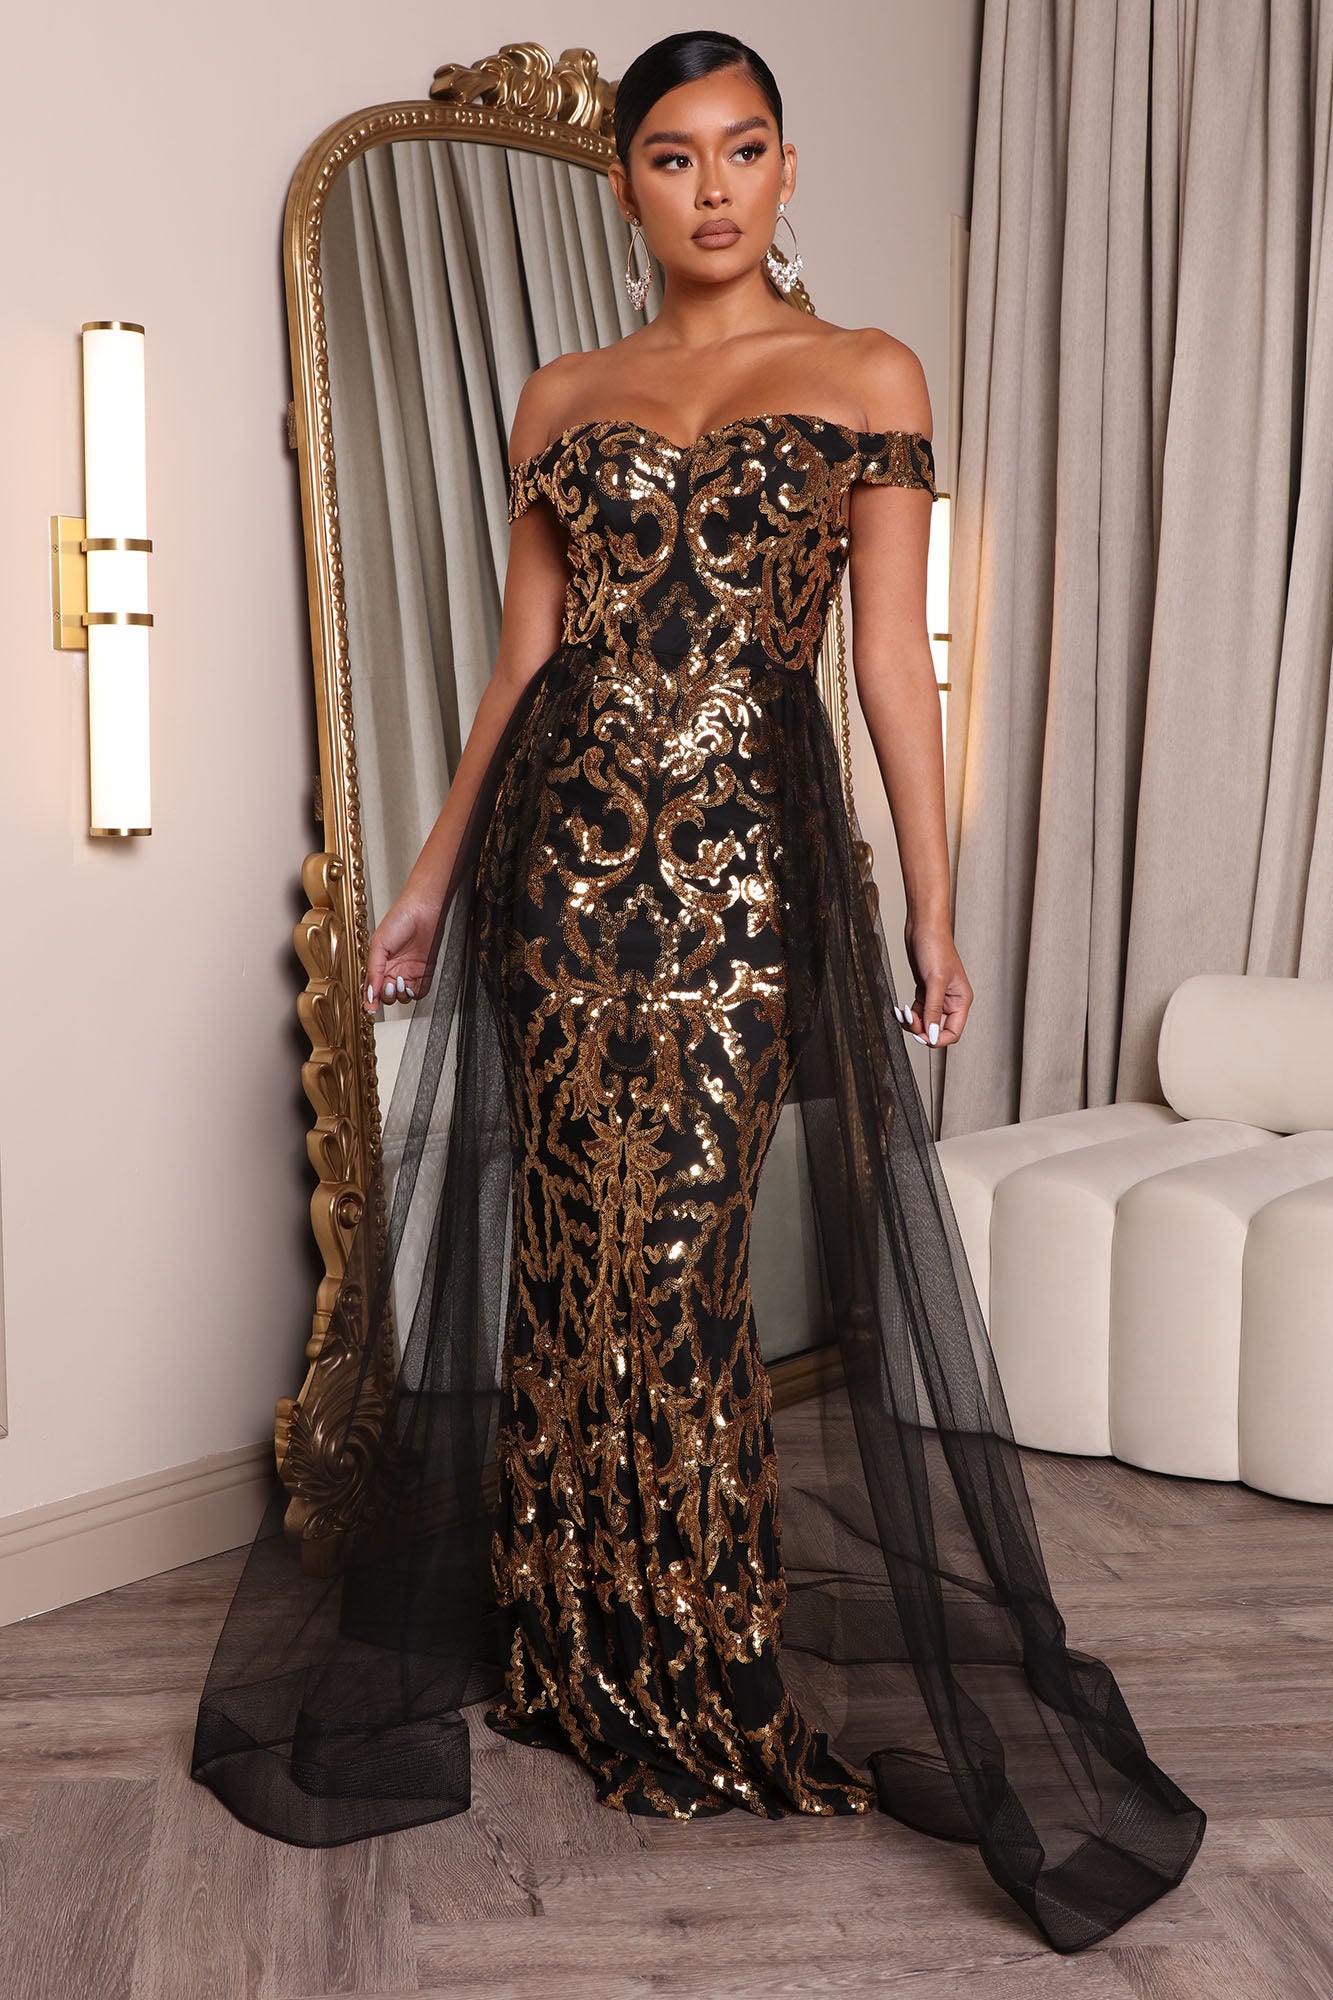 Black Prom Dress with Gold Beaded Classical Prom Dresses, Black Formal  Dresses, Evening Gowns 2018 · BeMyBridesmaid · Online Store Powered by  Storenvy